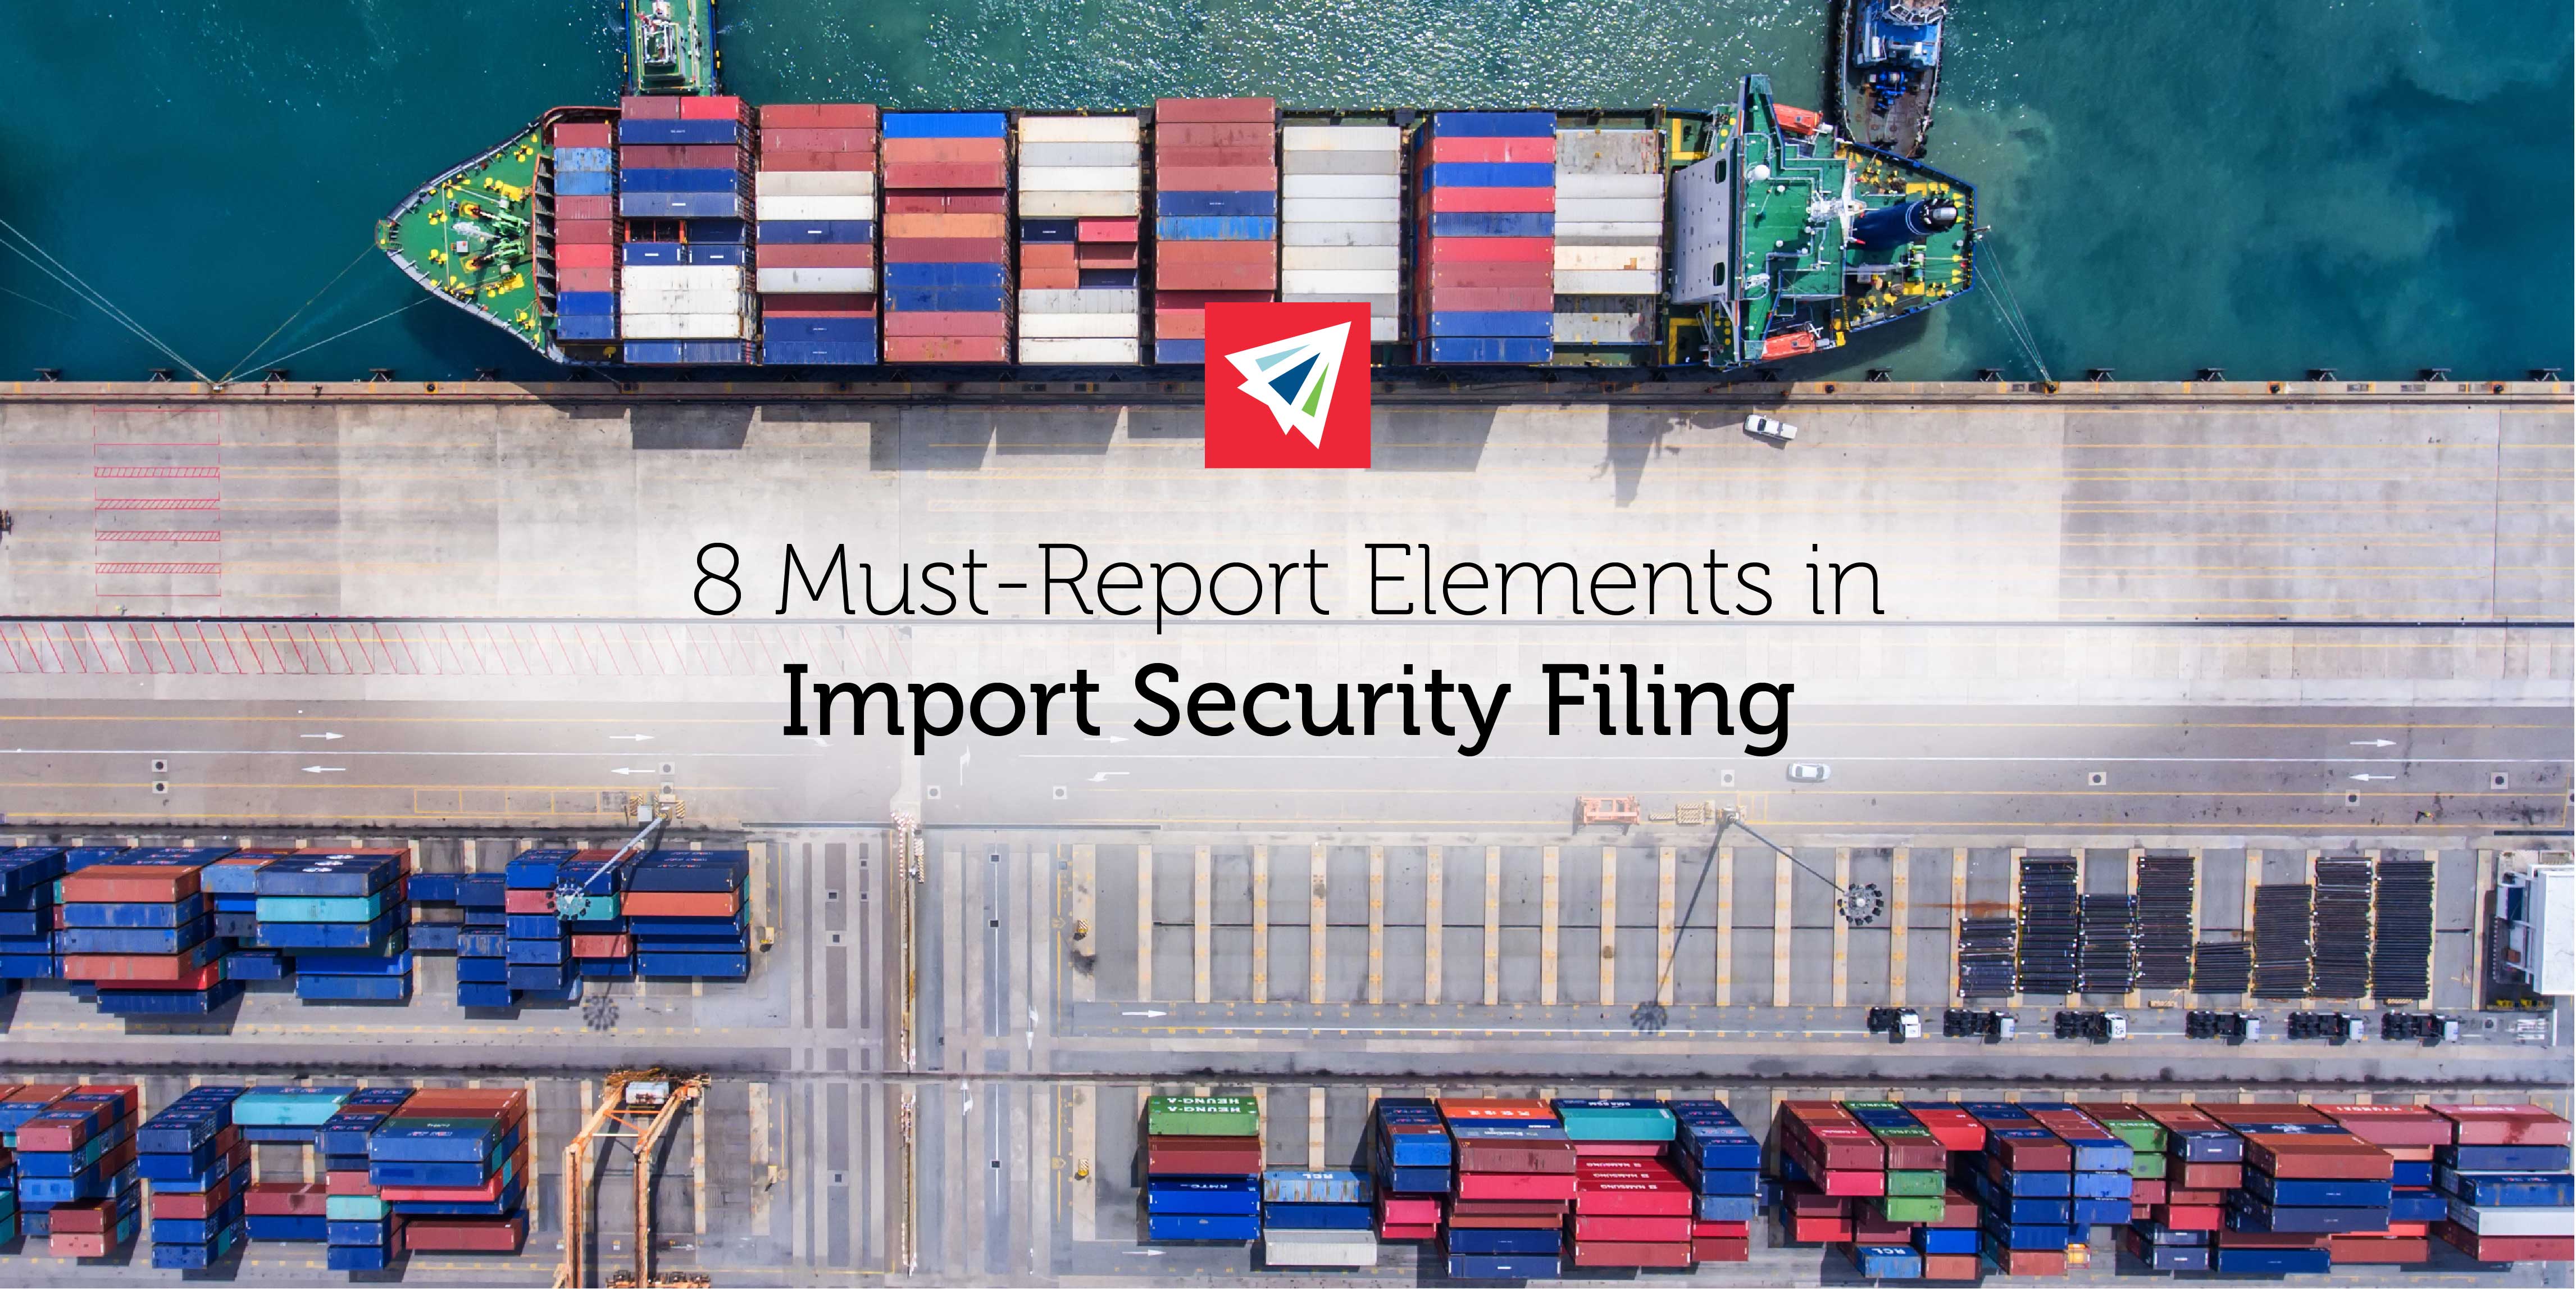 8 Must-Report Elements in Import Security Filing